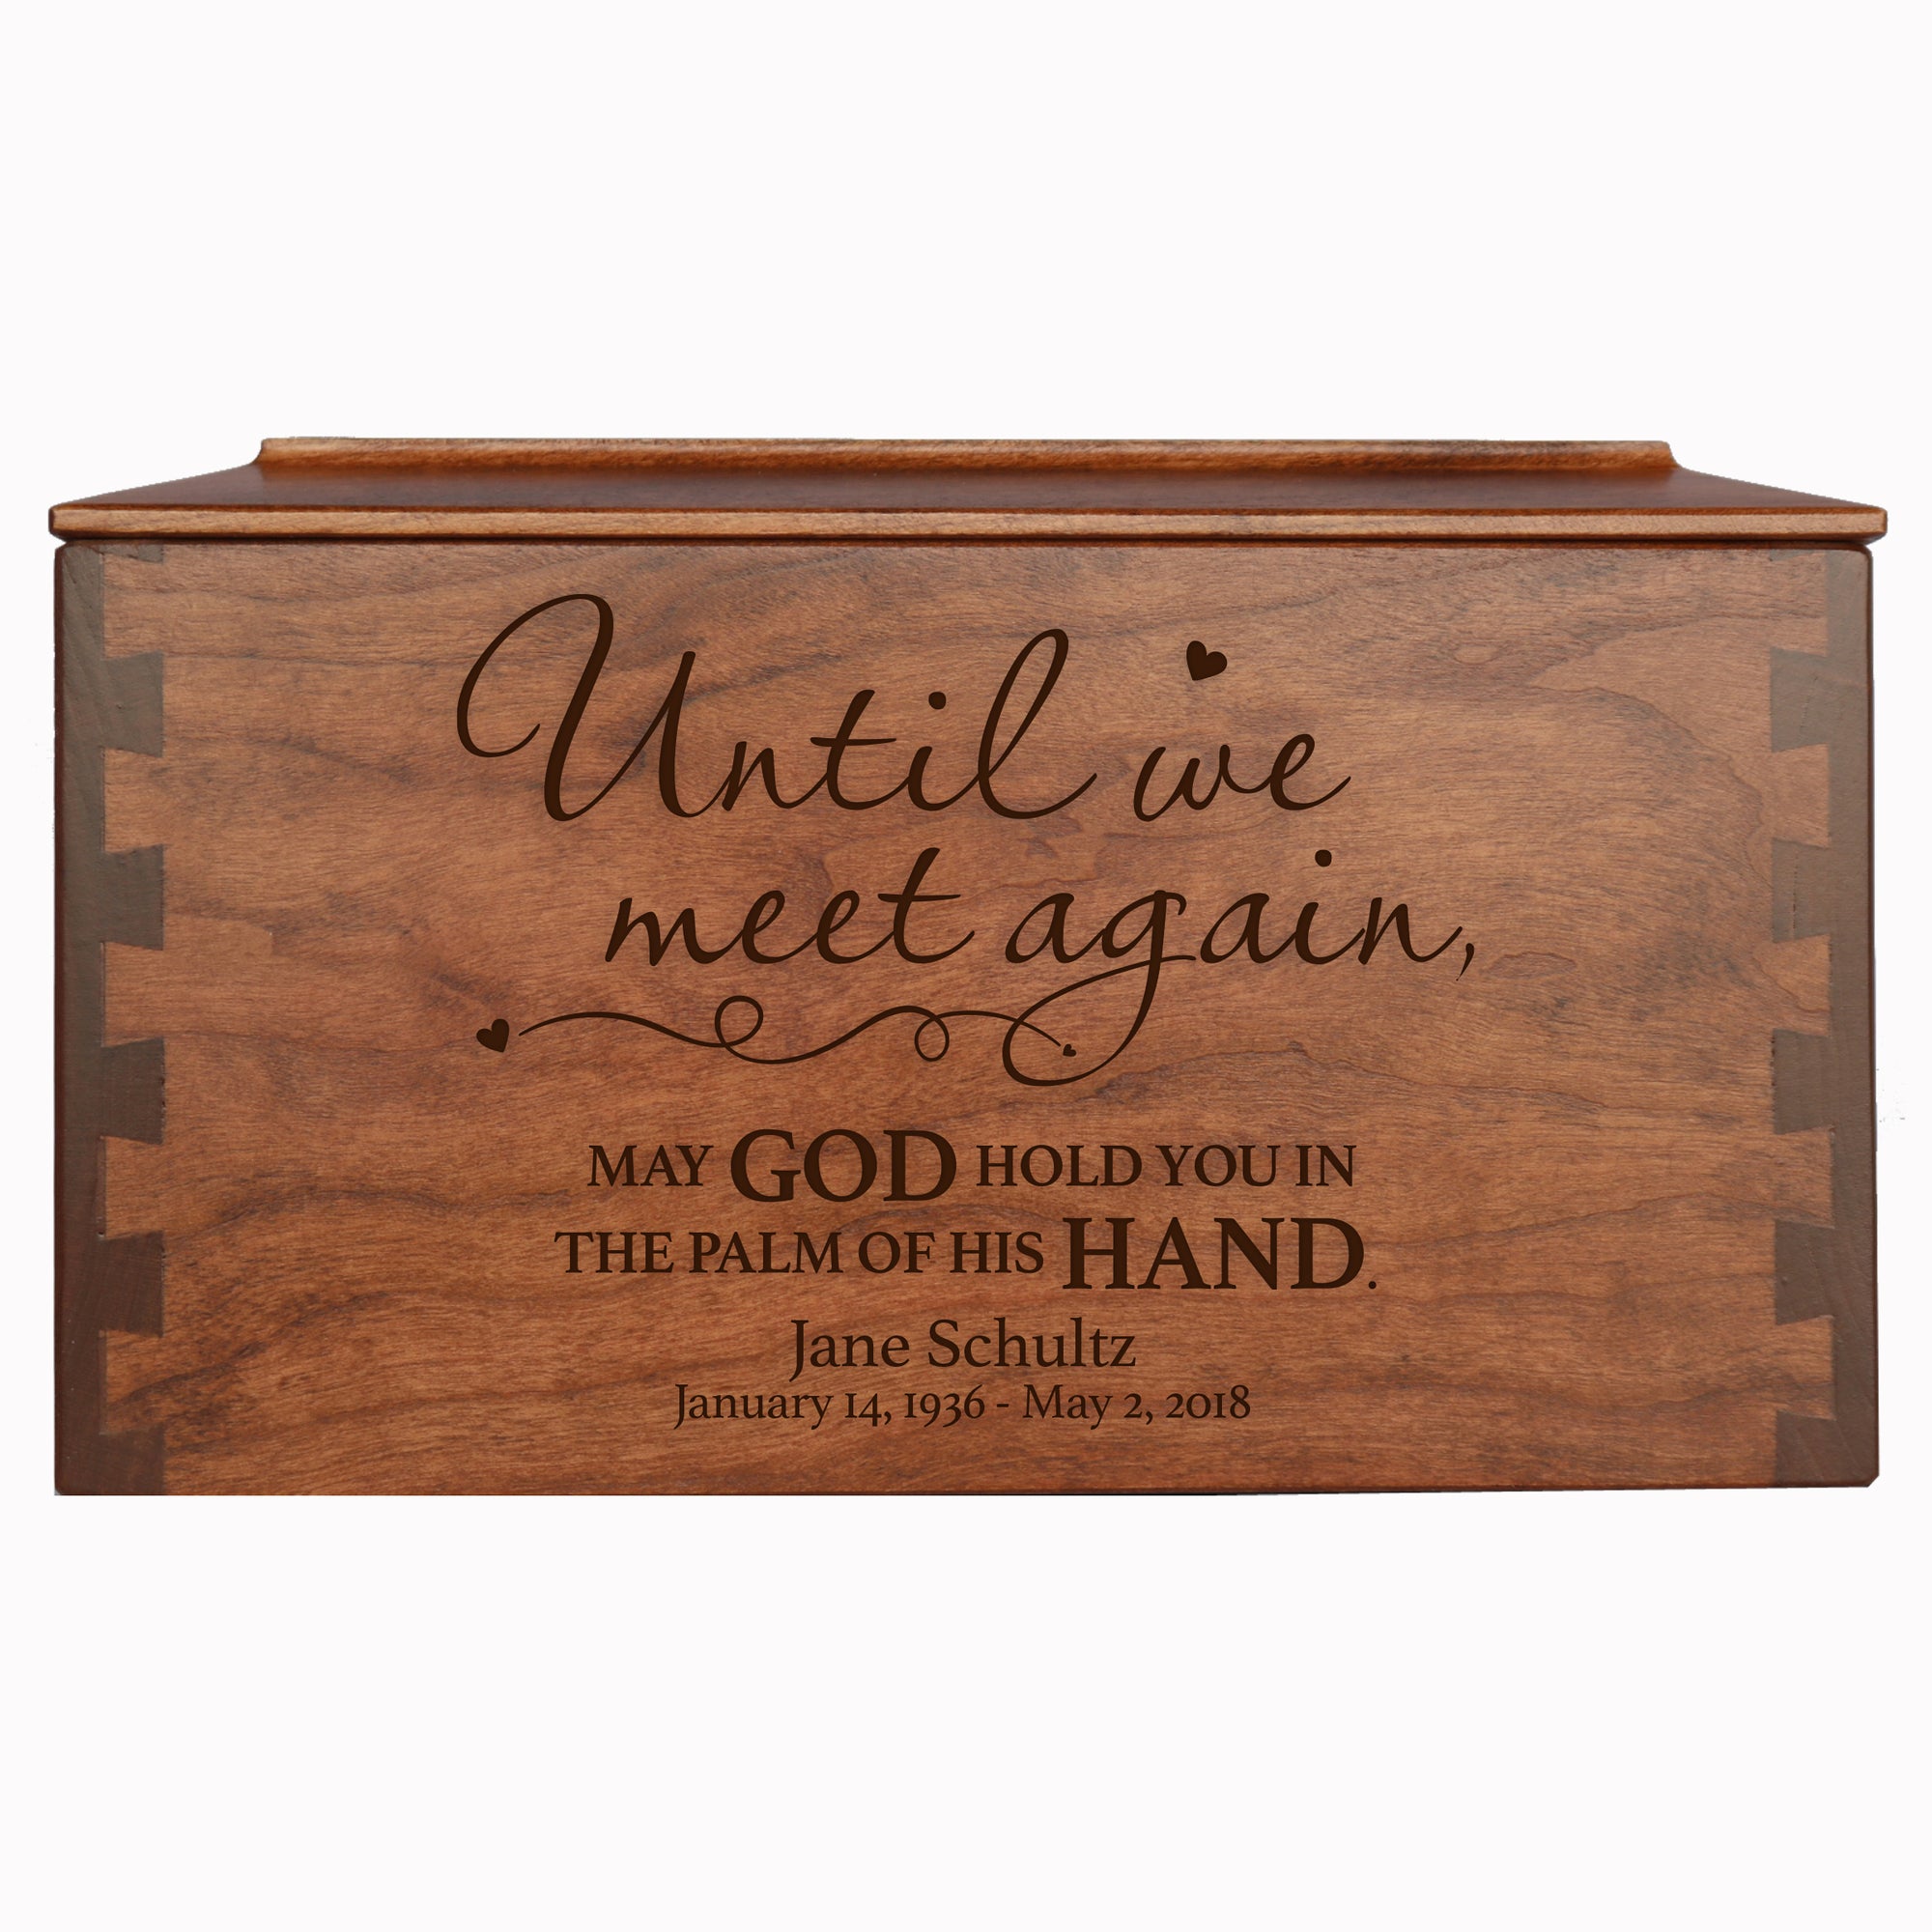 Until We Meet Again LifeSong Memorials Personalized Memorial Decorative Dovetail Cremation Urn For Human Ashes Funeral and Condolence Keepsake. Sympathy Gift for the Loss of a Loved One Bereavement Gift for Family Friends Condolence Sympathy Comfort Keepsake Funeral Decoration.